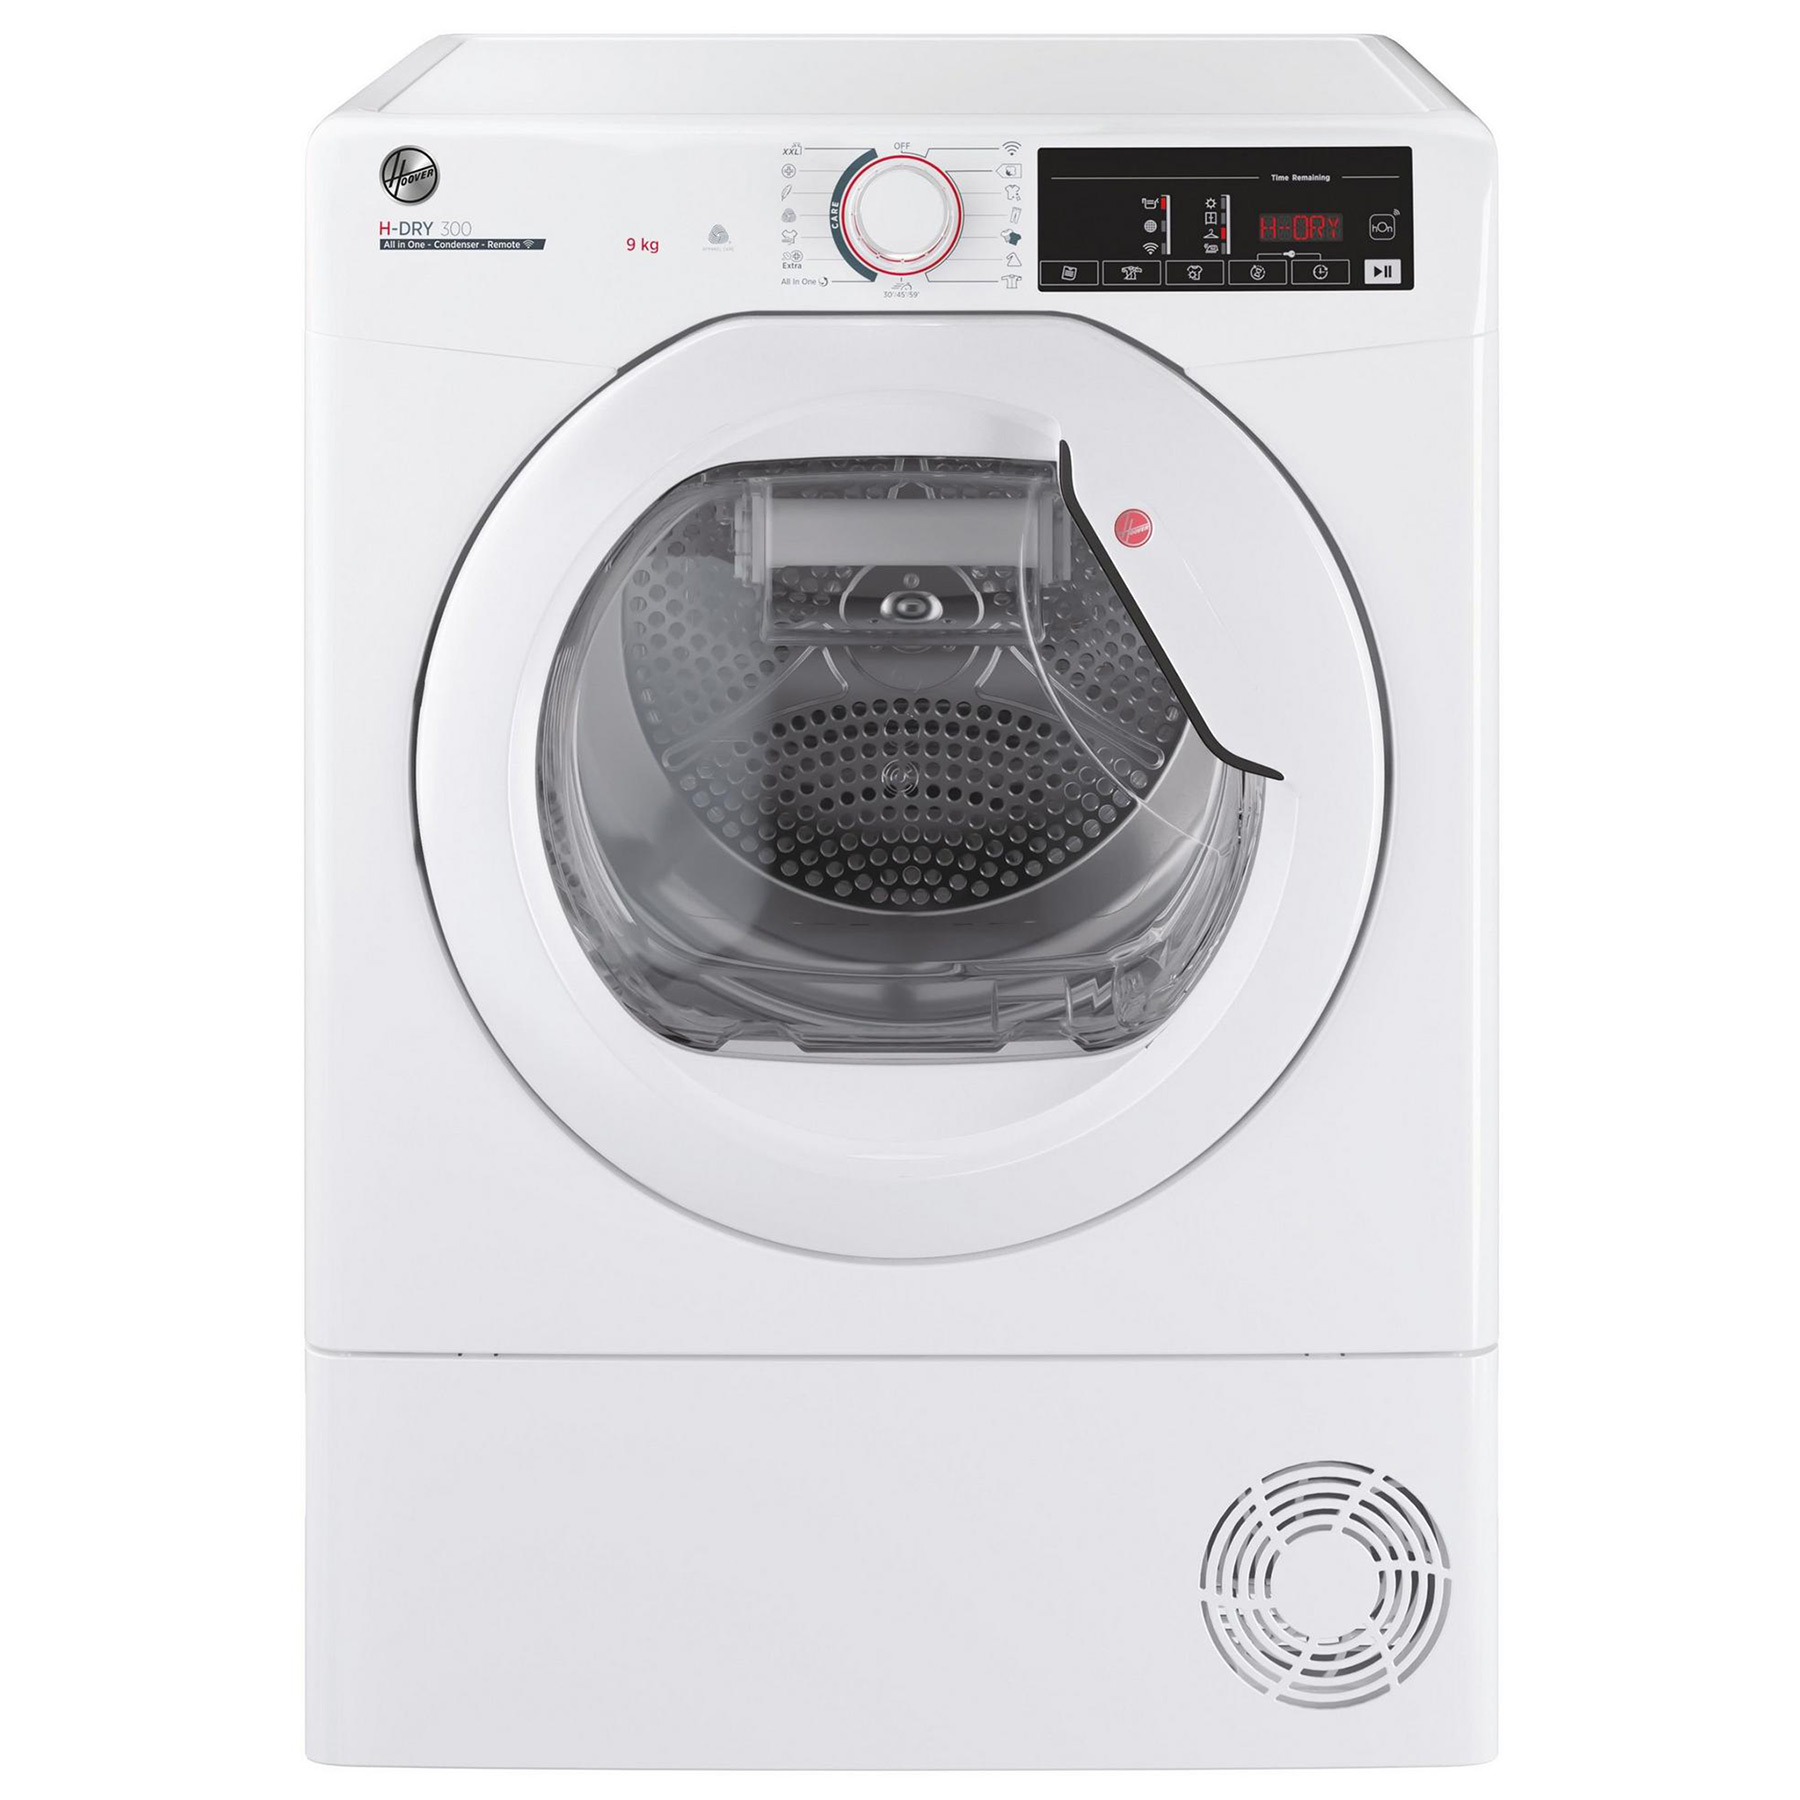 Image of Hoover HLEC9TE 9kg Condenser Dryer in White B Rated Sensor WiFi